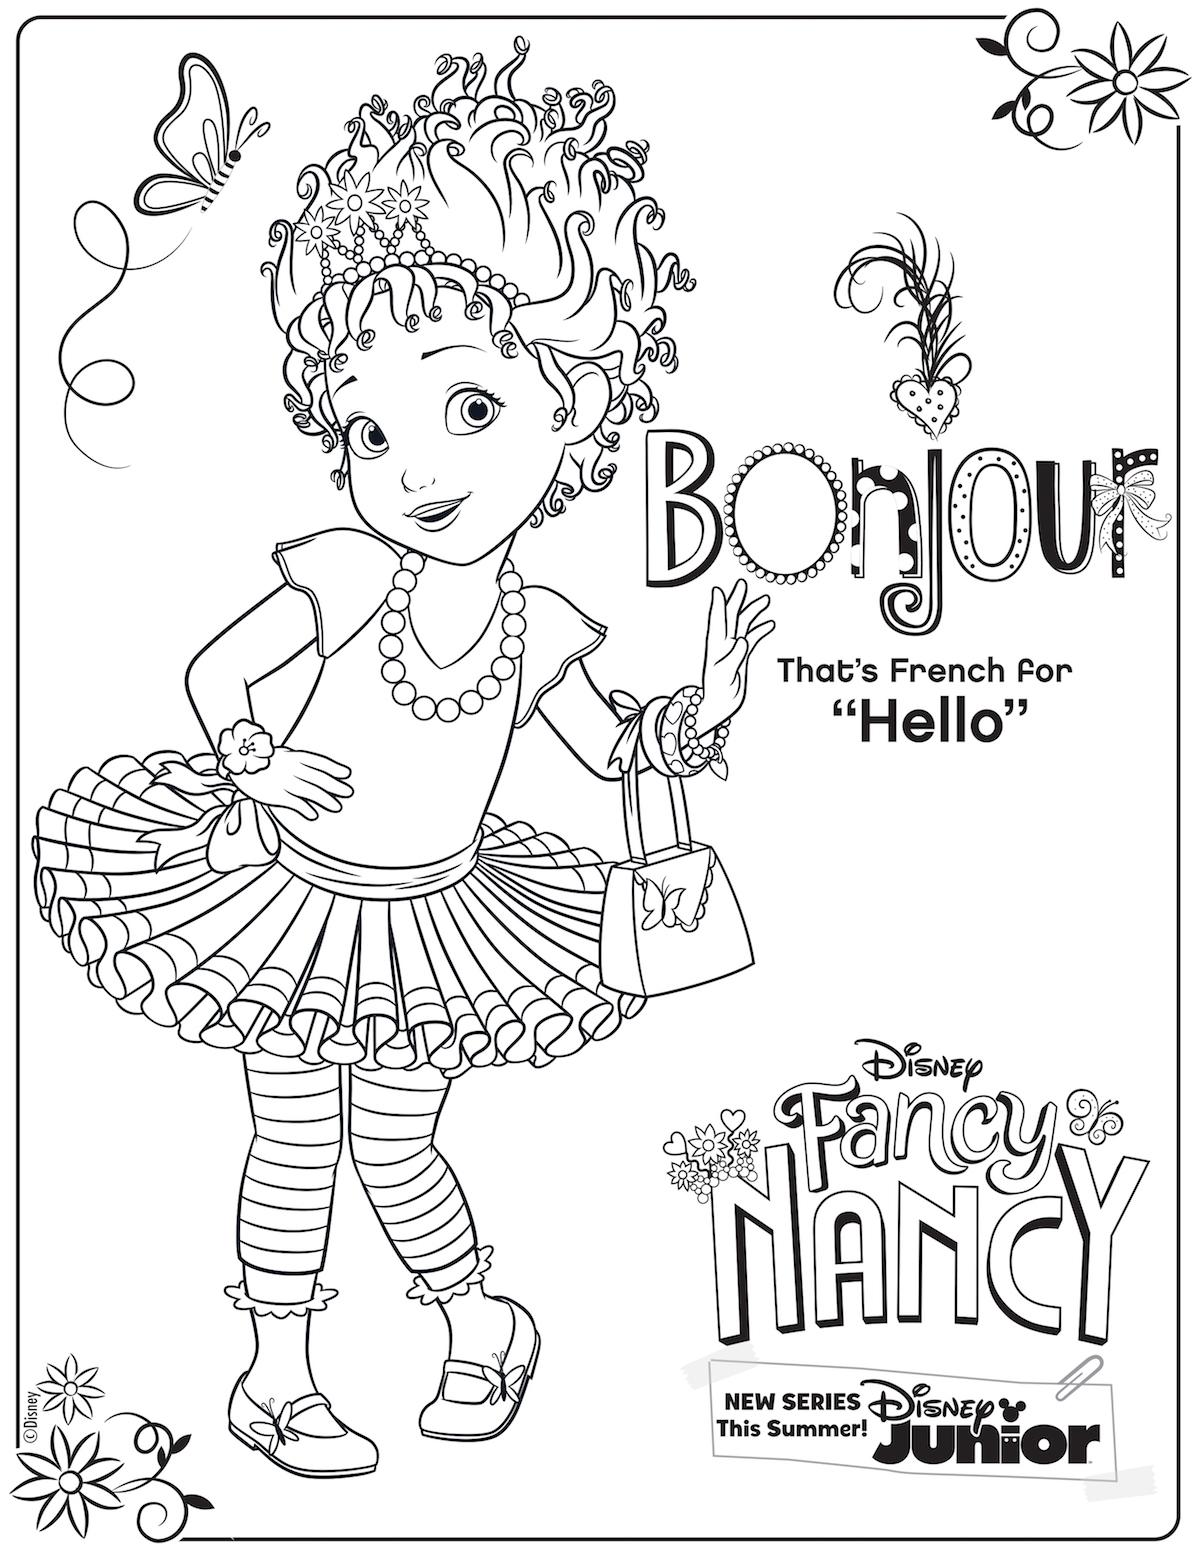 fancy-nancy-printable-birthday-party-cupcake-toppers-favor-tags-via